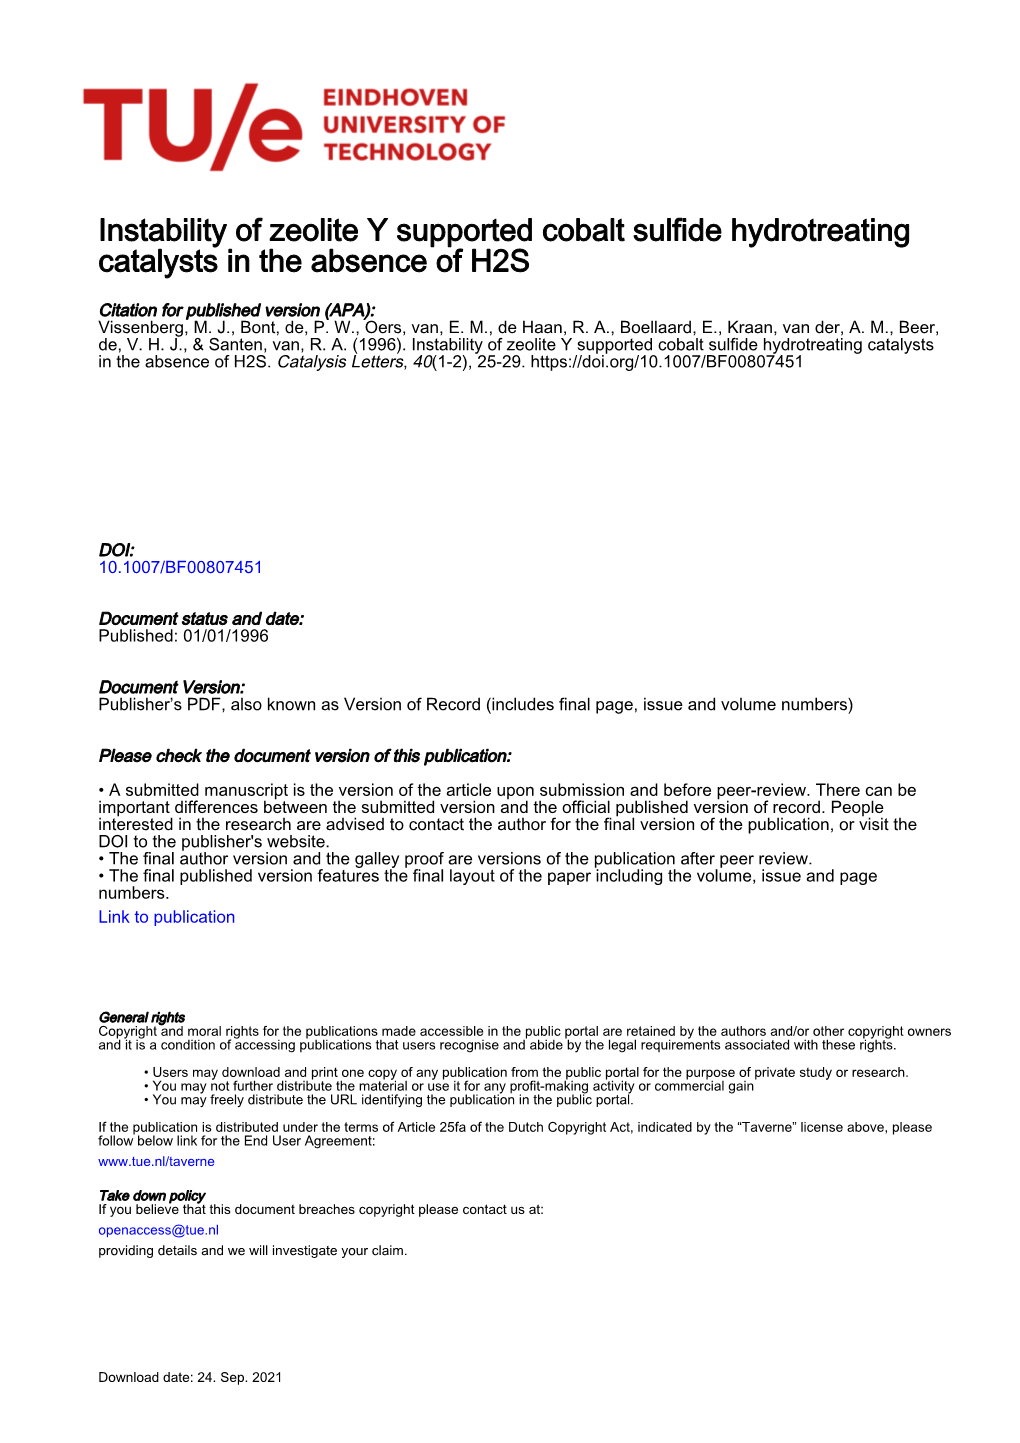 Instability of Zeolite Y Supported Cobalt Sulfide Hydrotreating Catalysts in the Absence of H2S